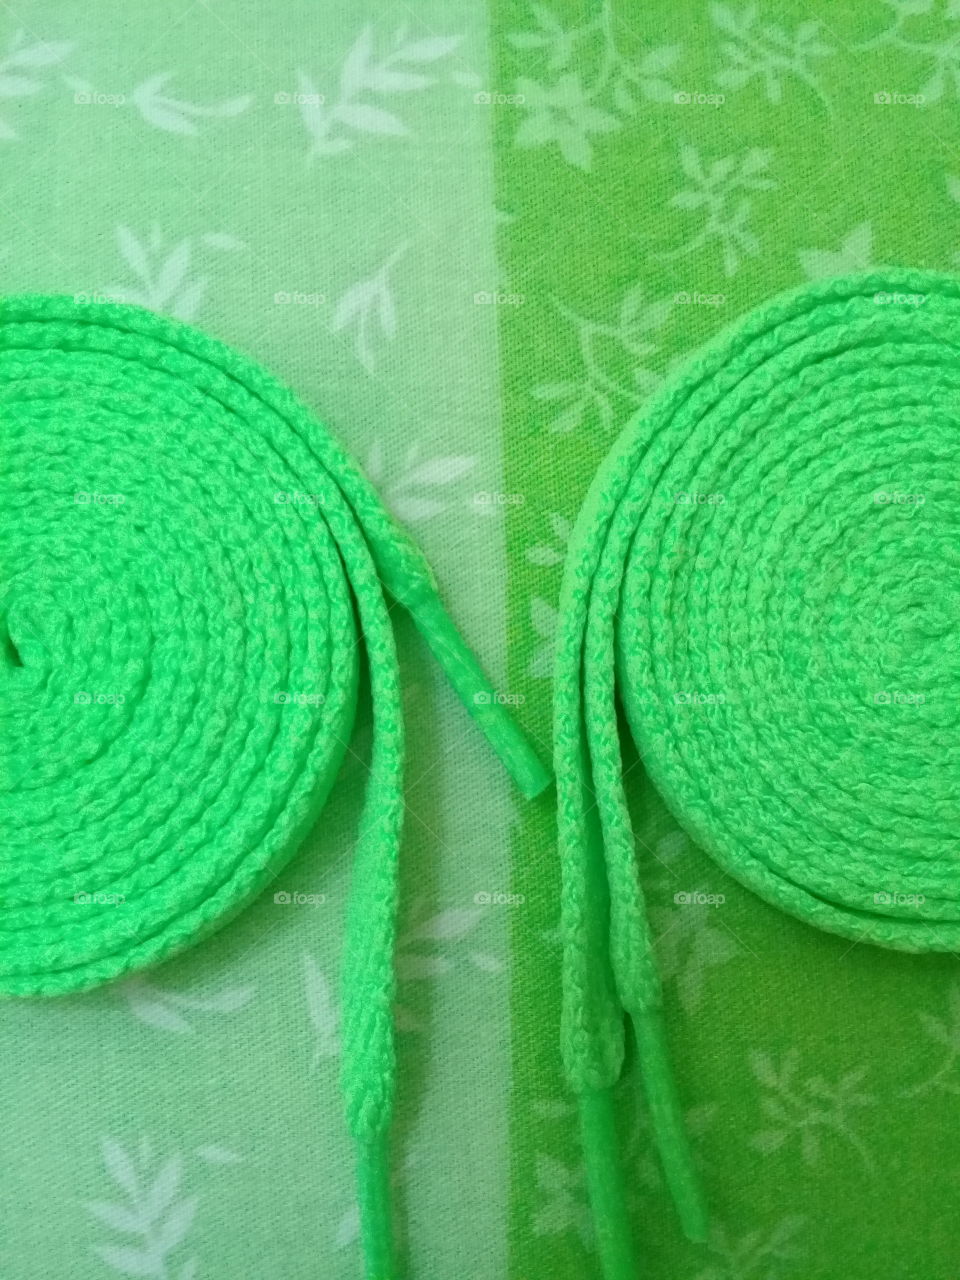 Shoe laces on its rolled design.